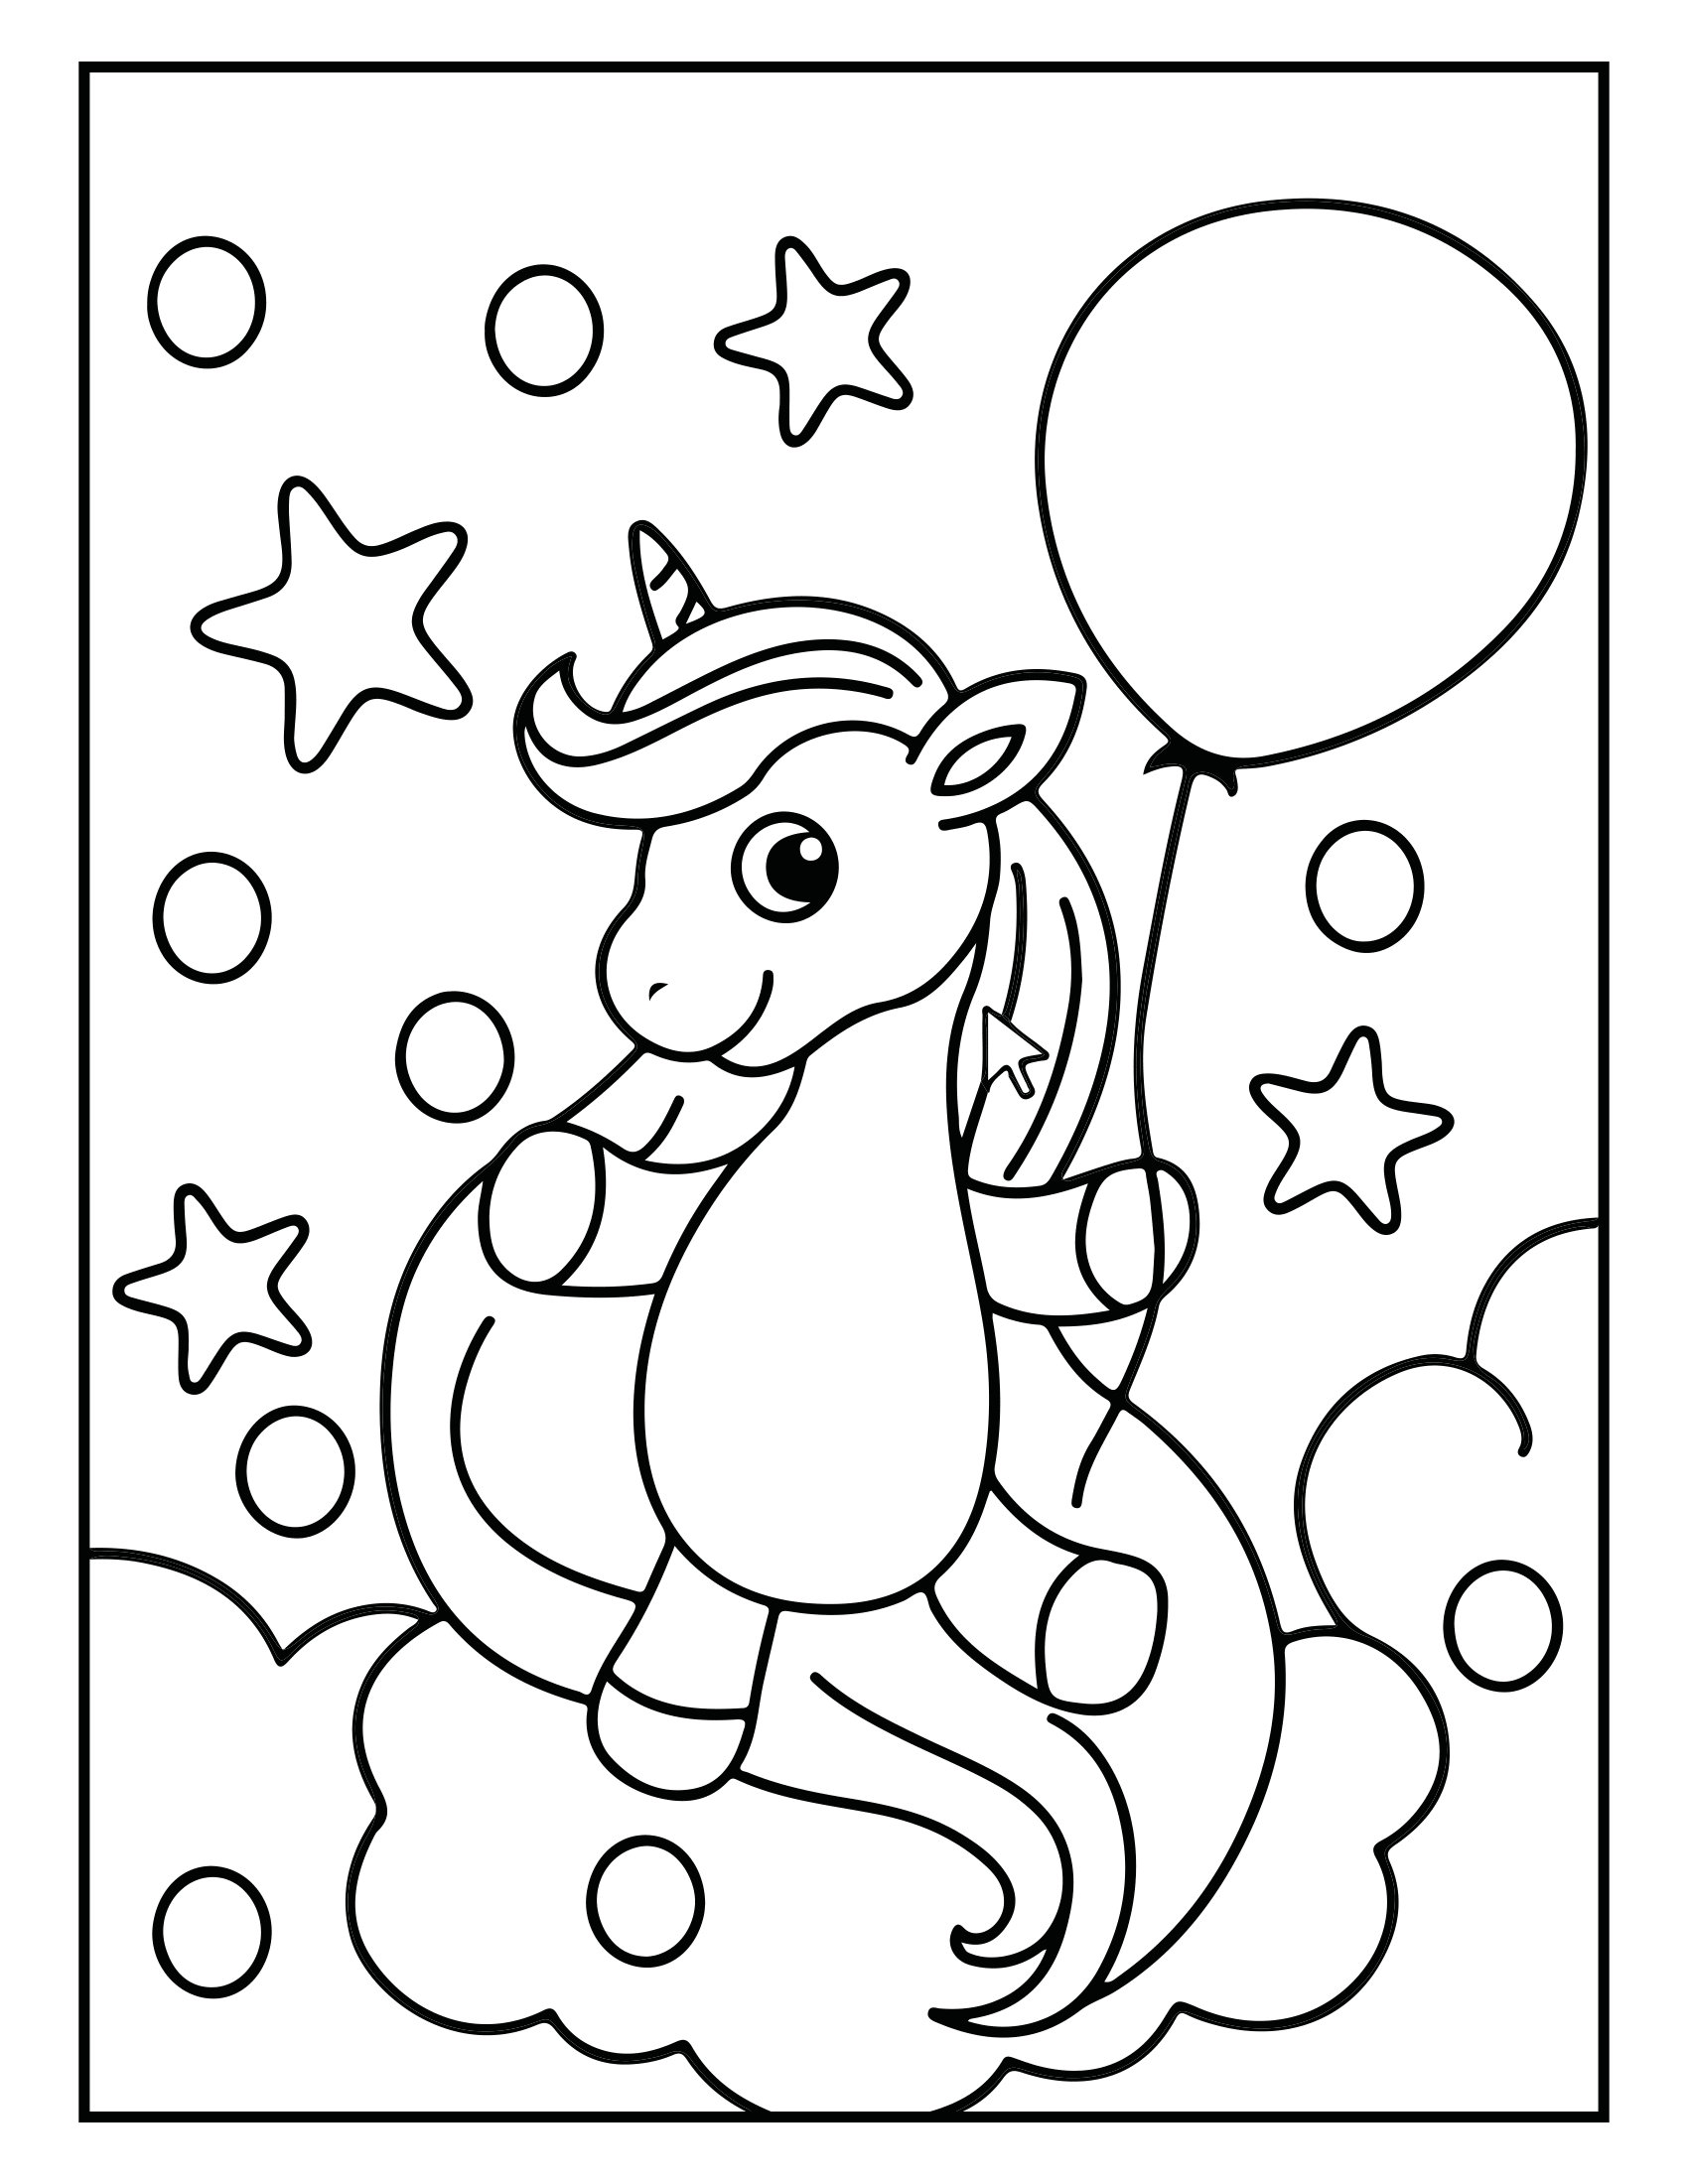 Pretty Unicorn Coloring Pages for Kids 20 Printable Pages - Etsy